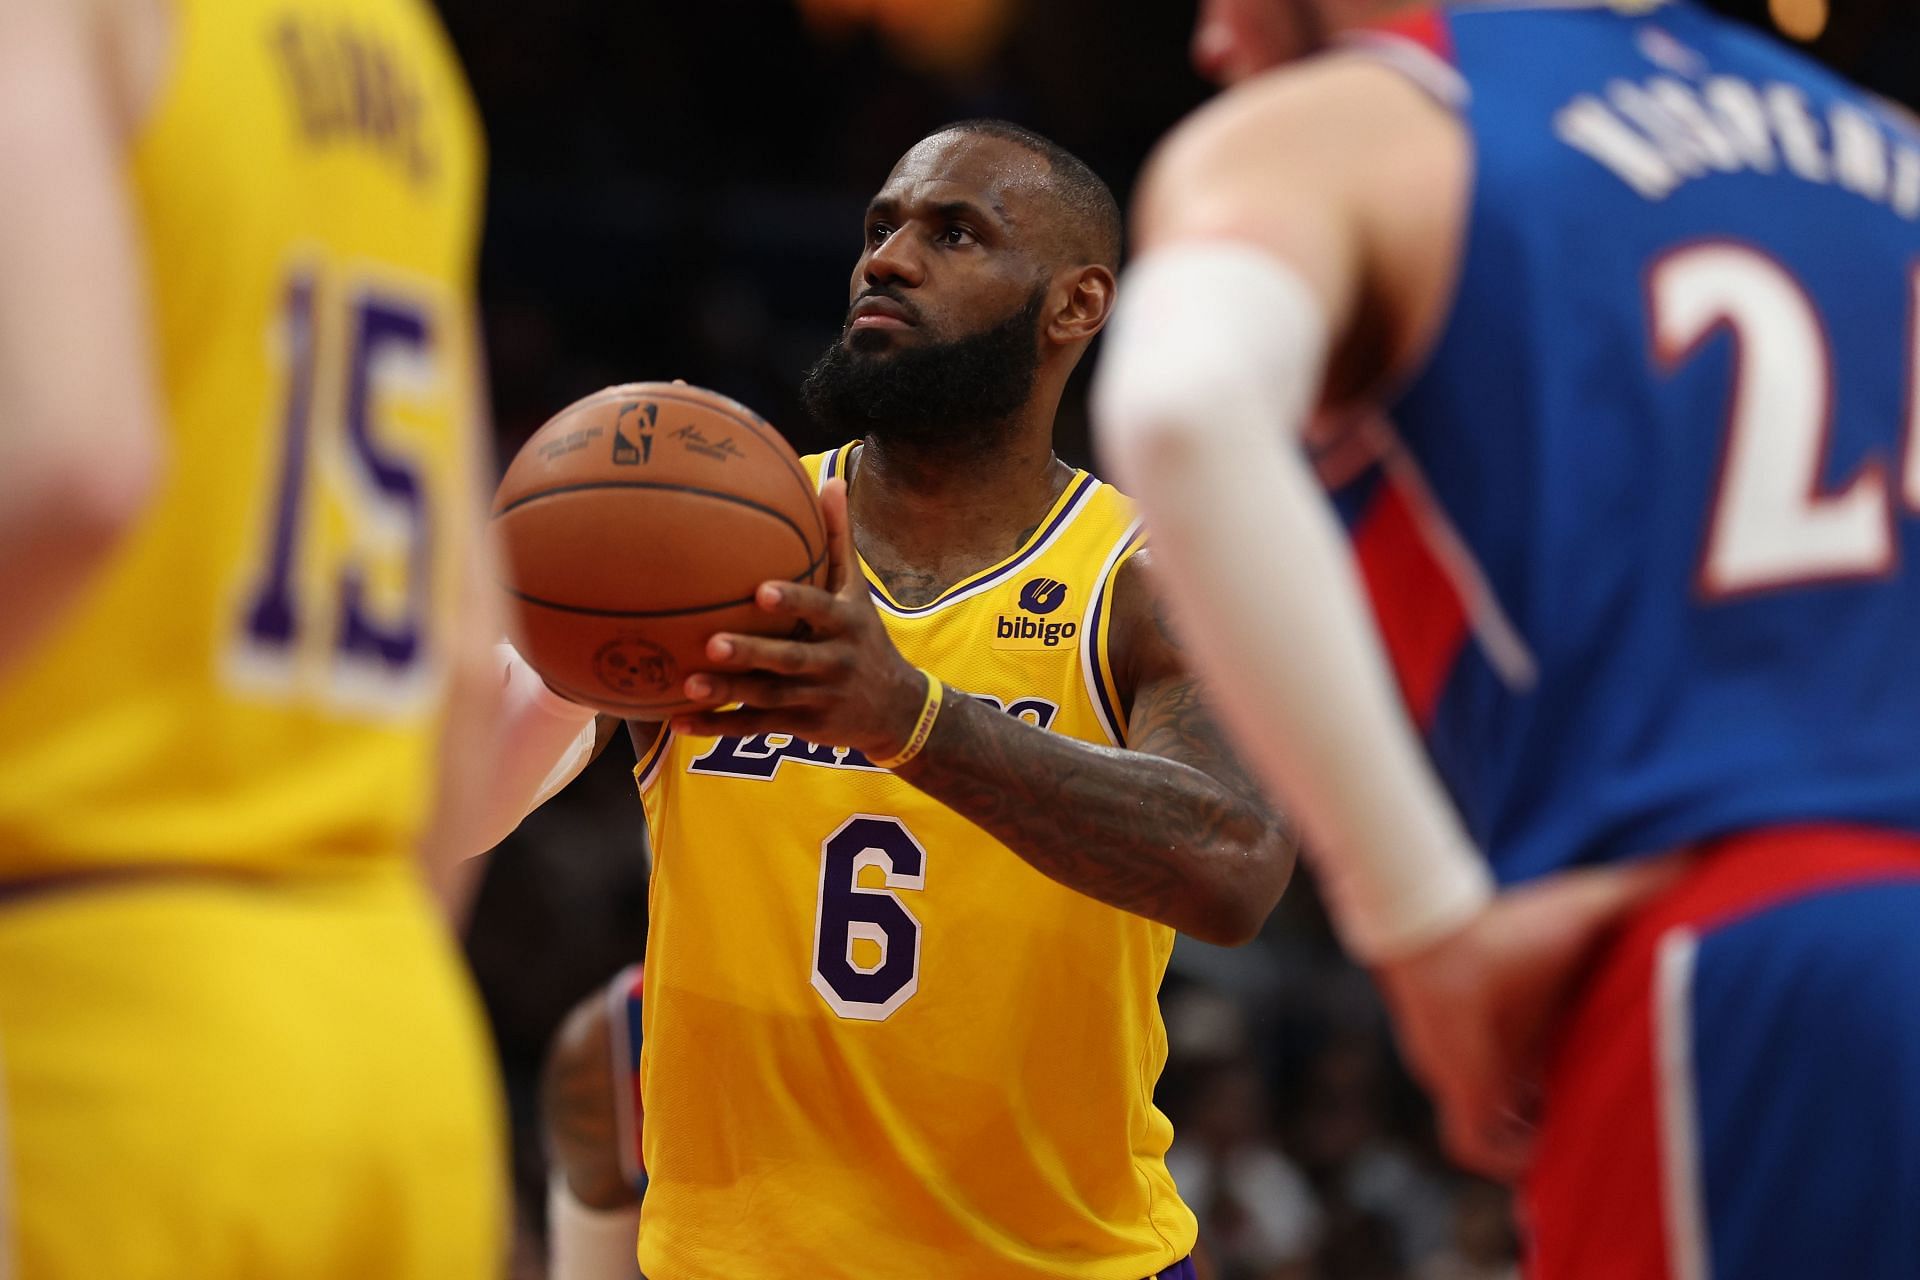 LeBron James of the LA Lakers attempts a free throw.